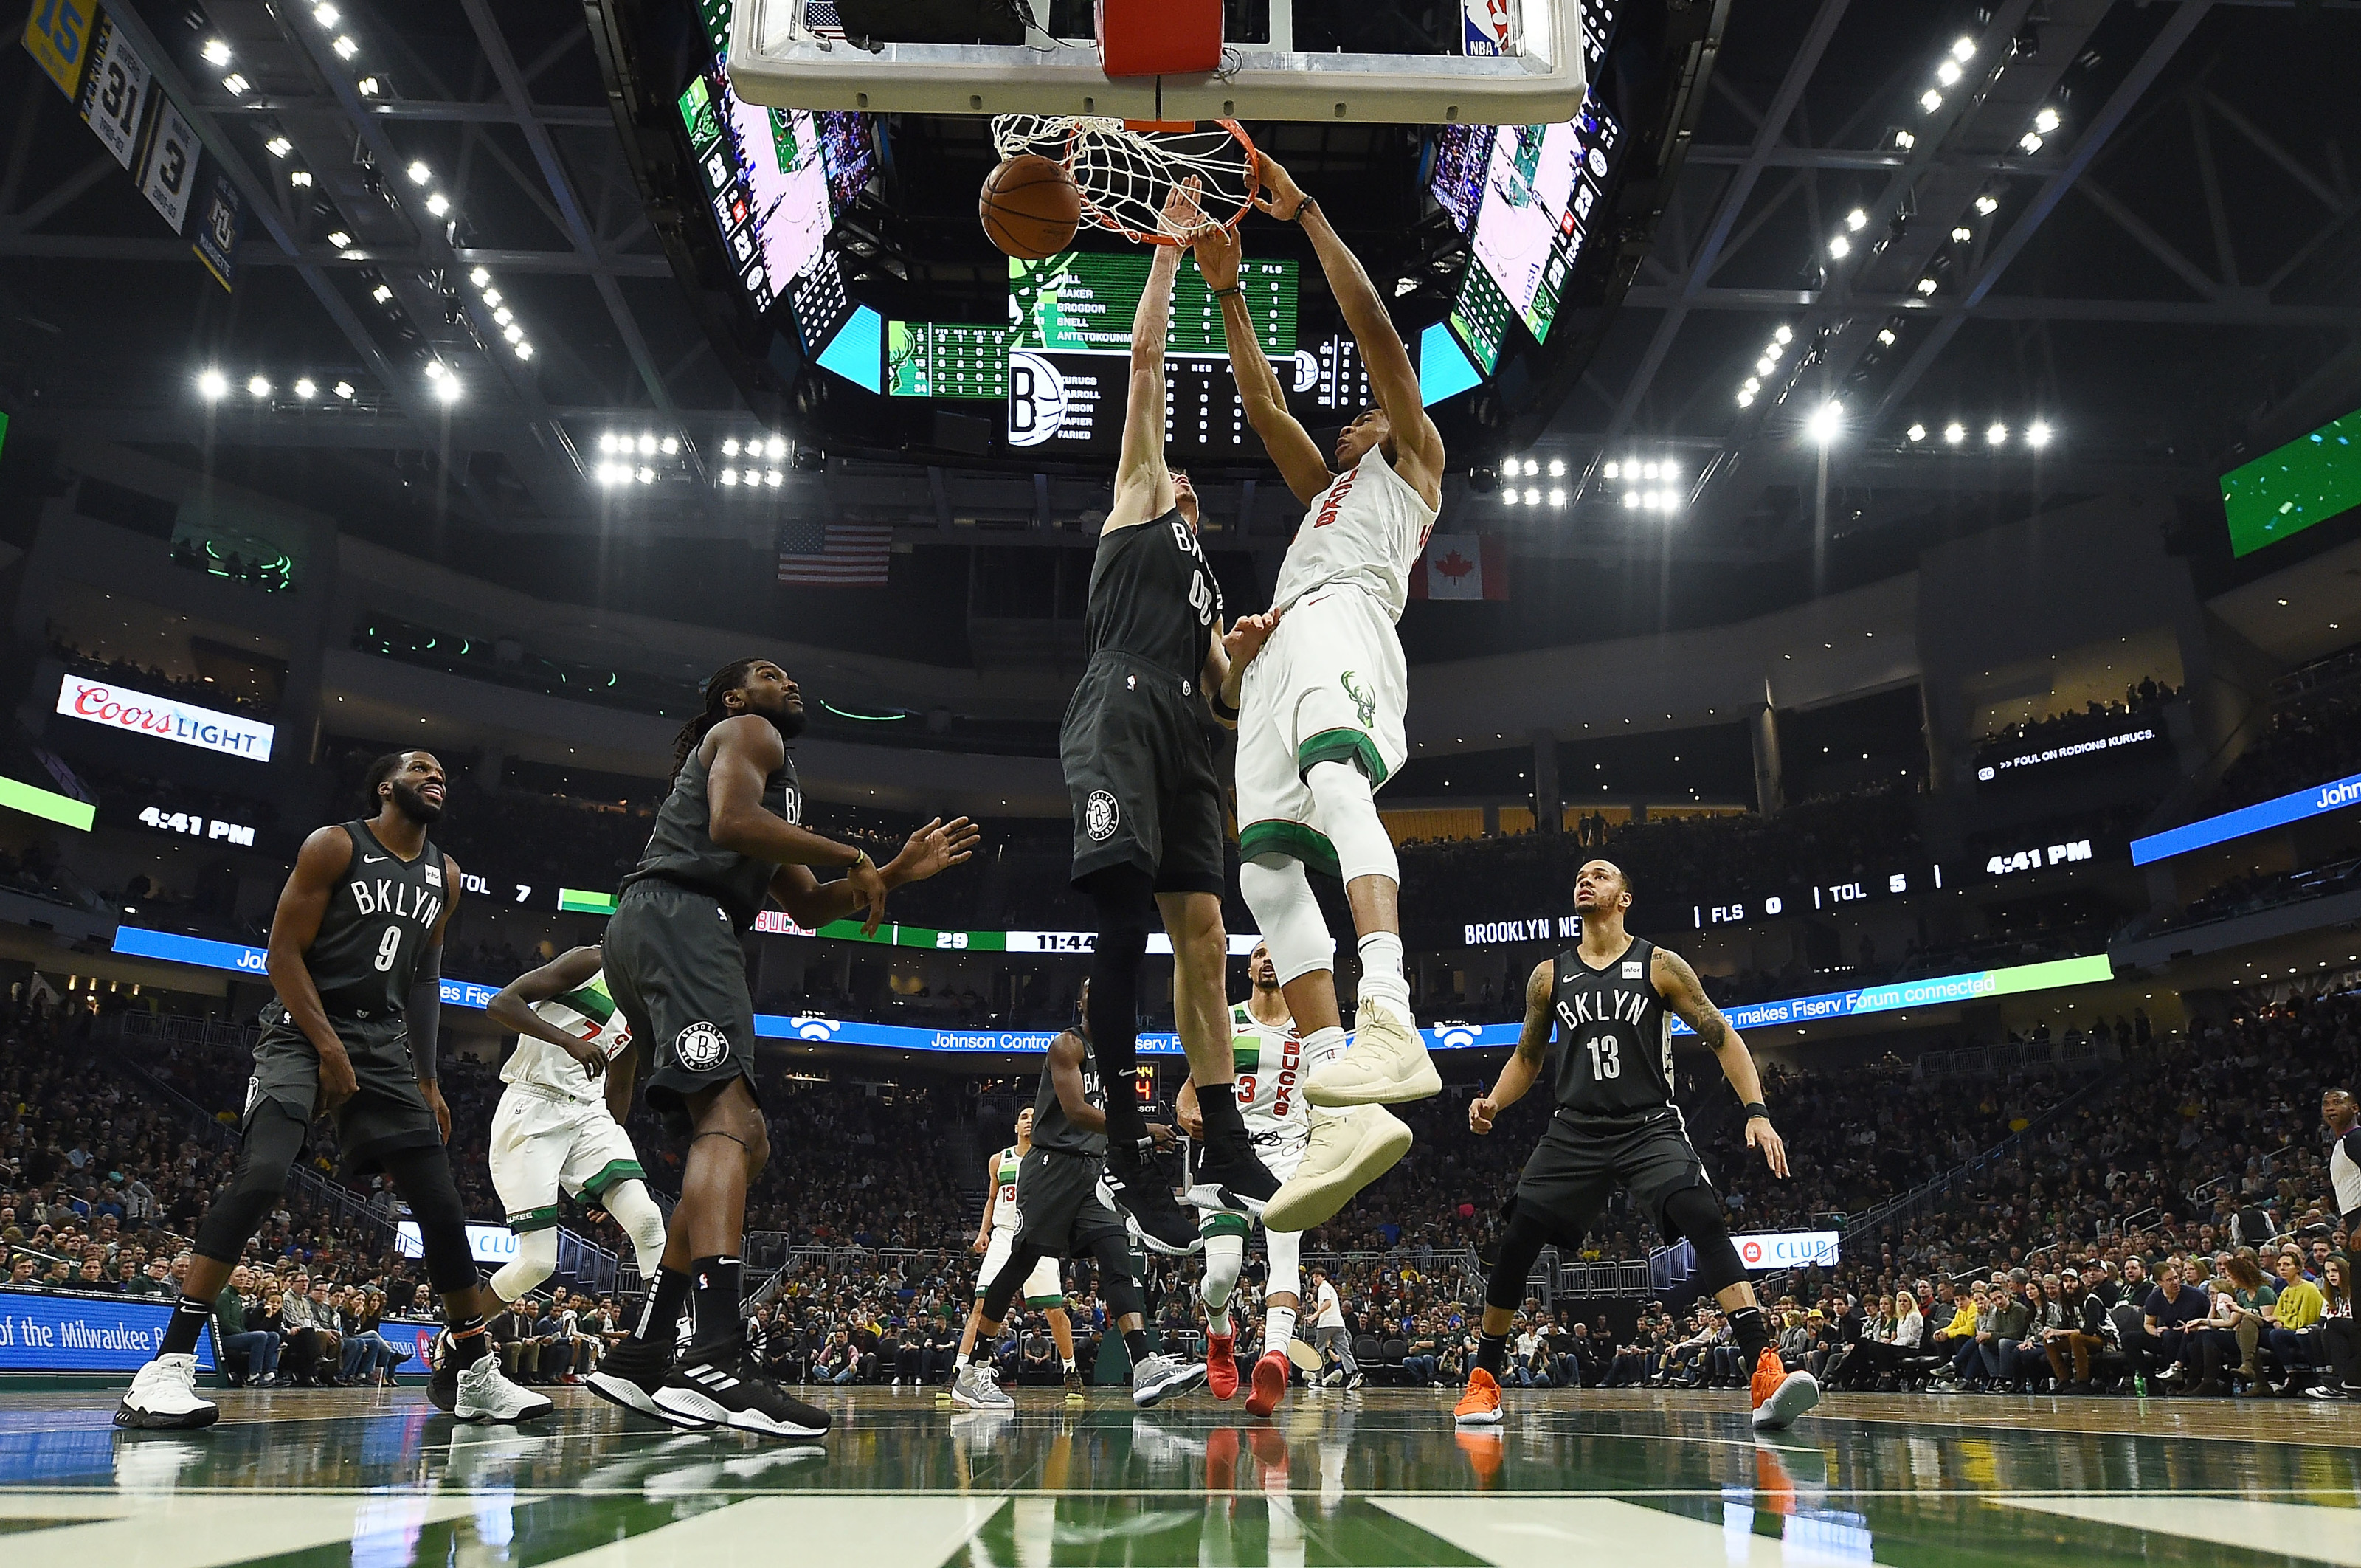 Monster night from Antetokounmpo powers Bucks to win over Rockets